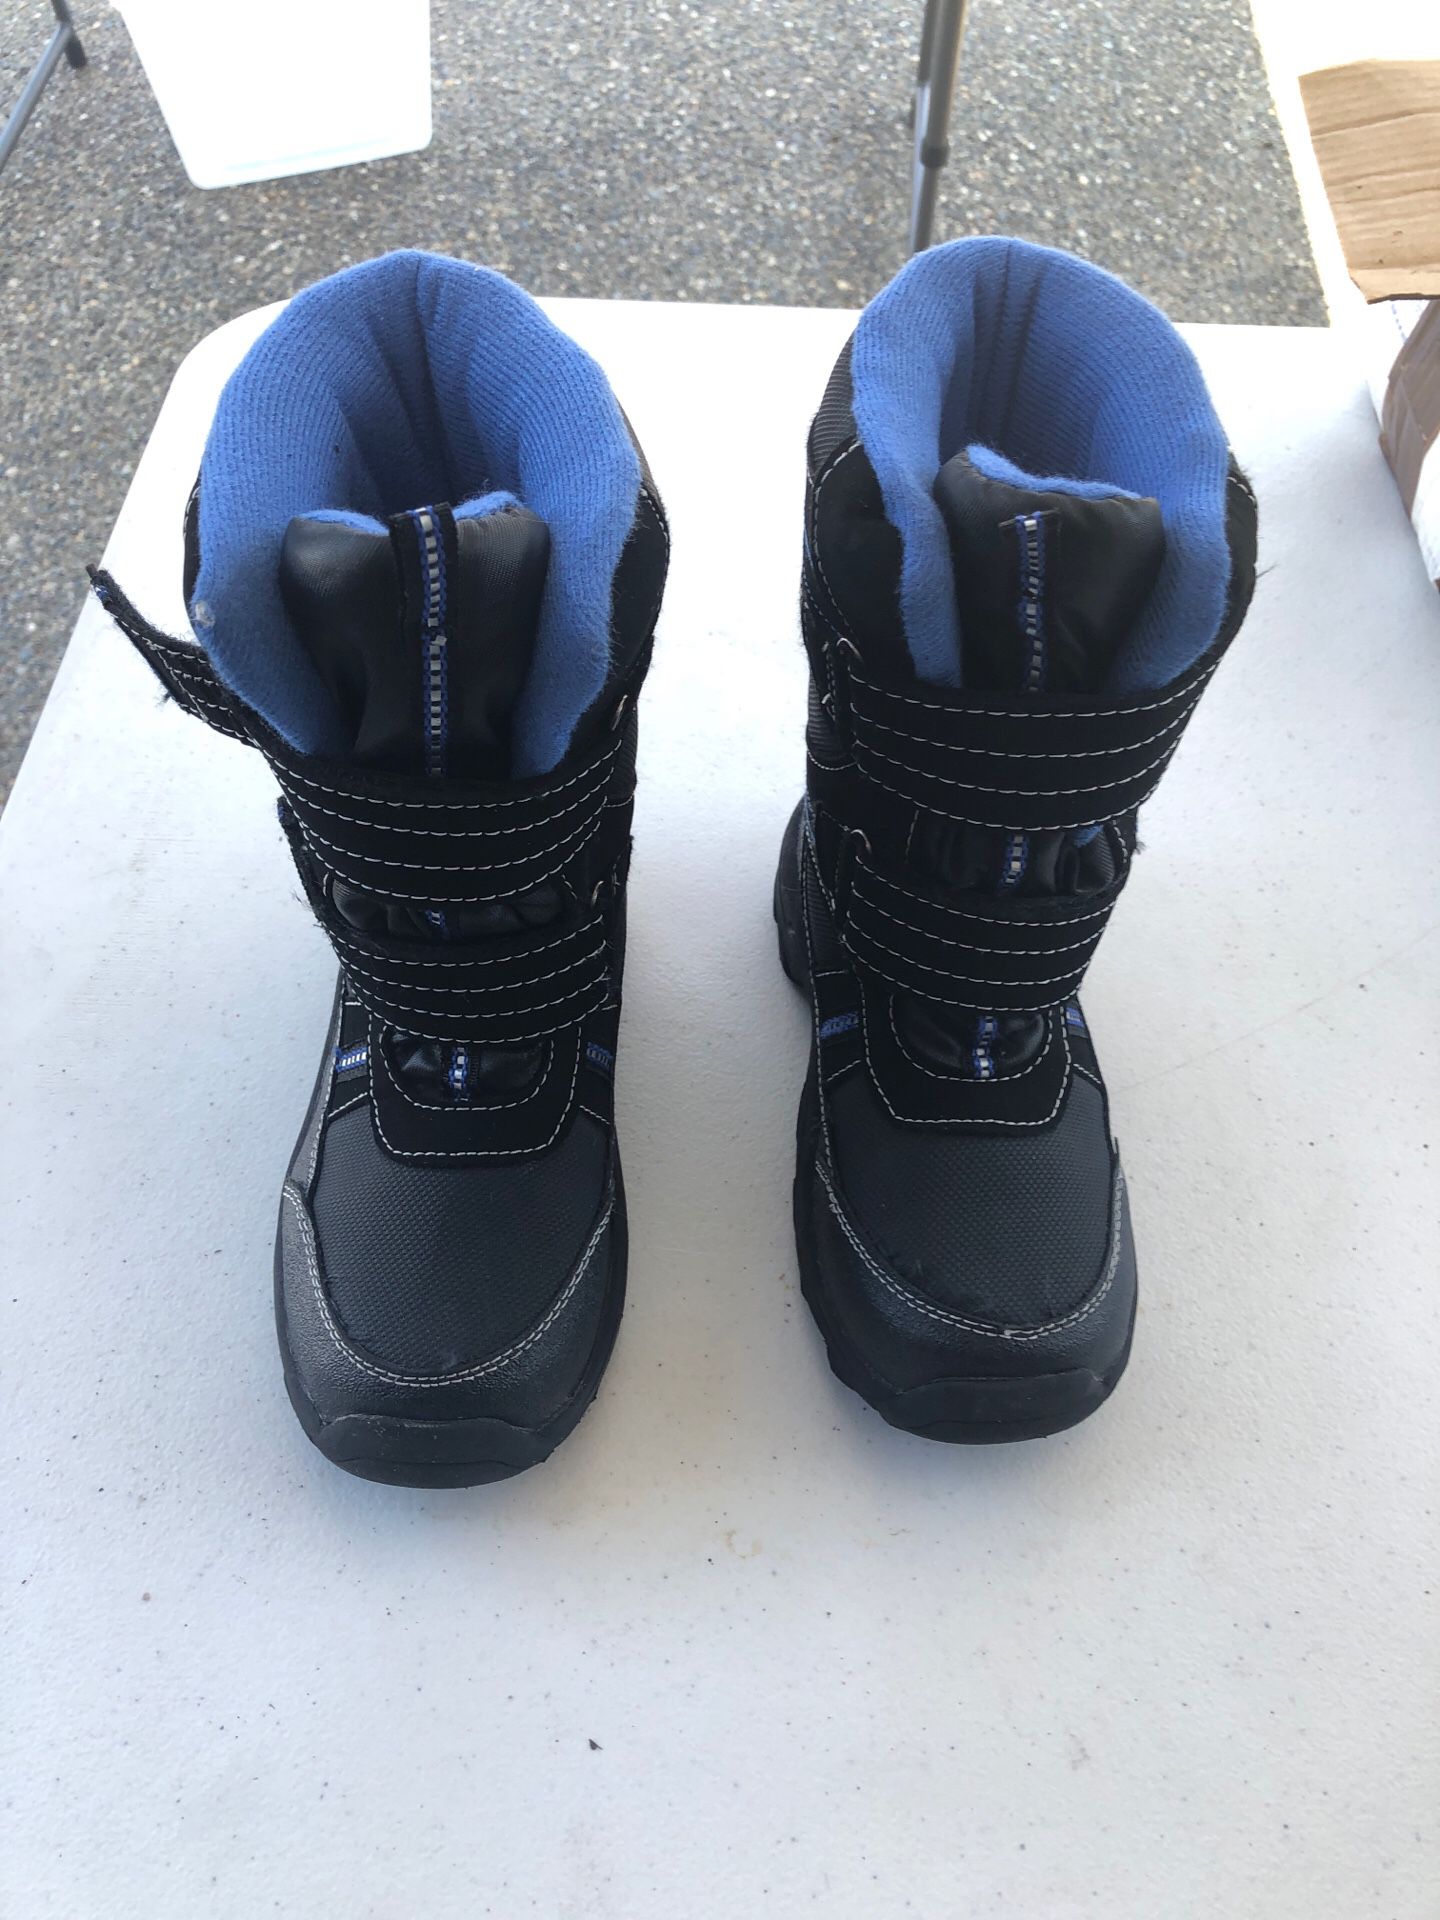 Kids snow boots size 13’s